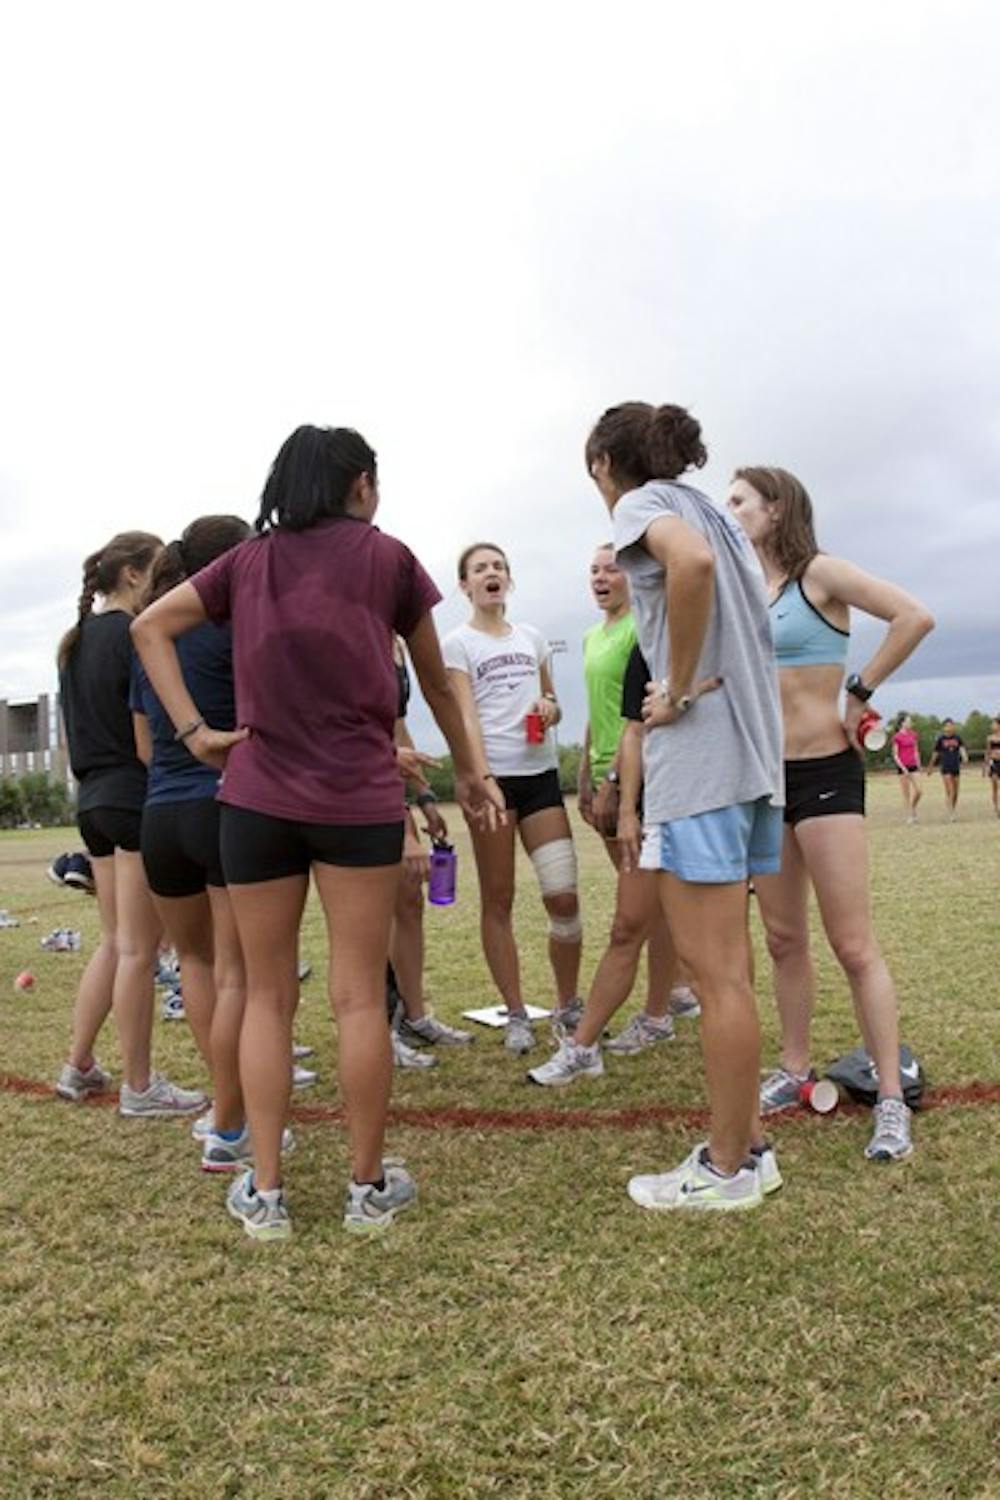 TEAM HUDDLE: The cross country women's team ends practice last season on a positive note with a team cheer. (Photo by Annie Wechter)